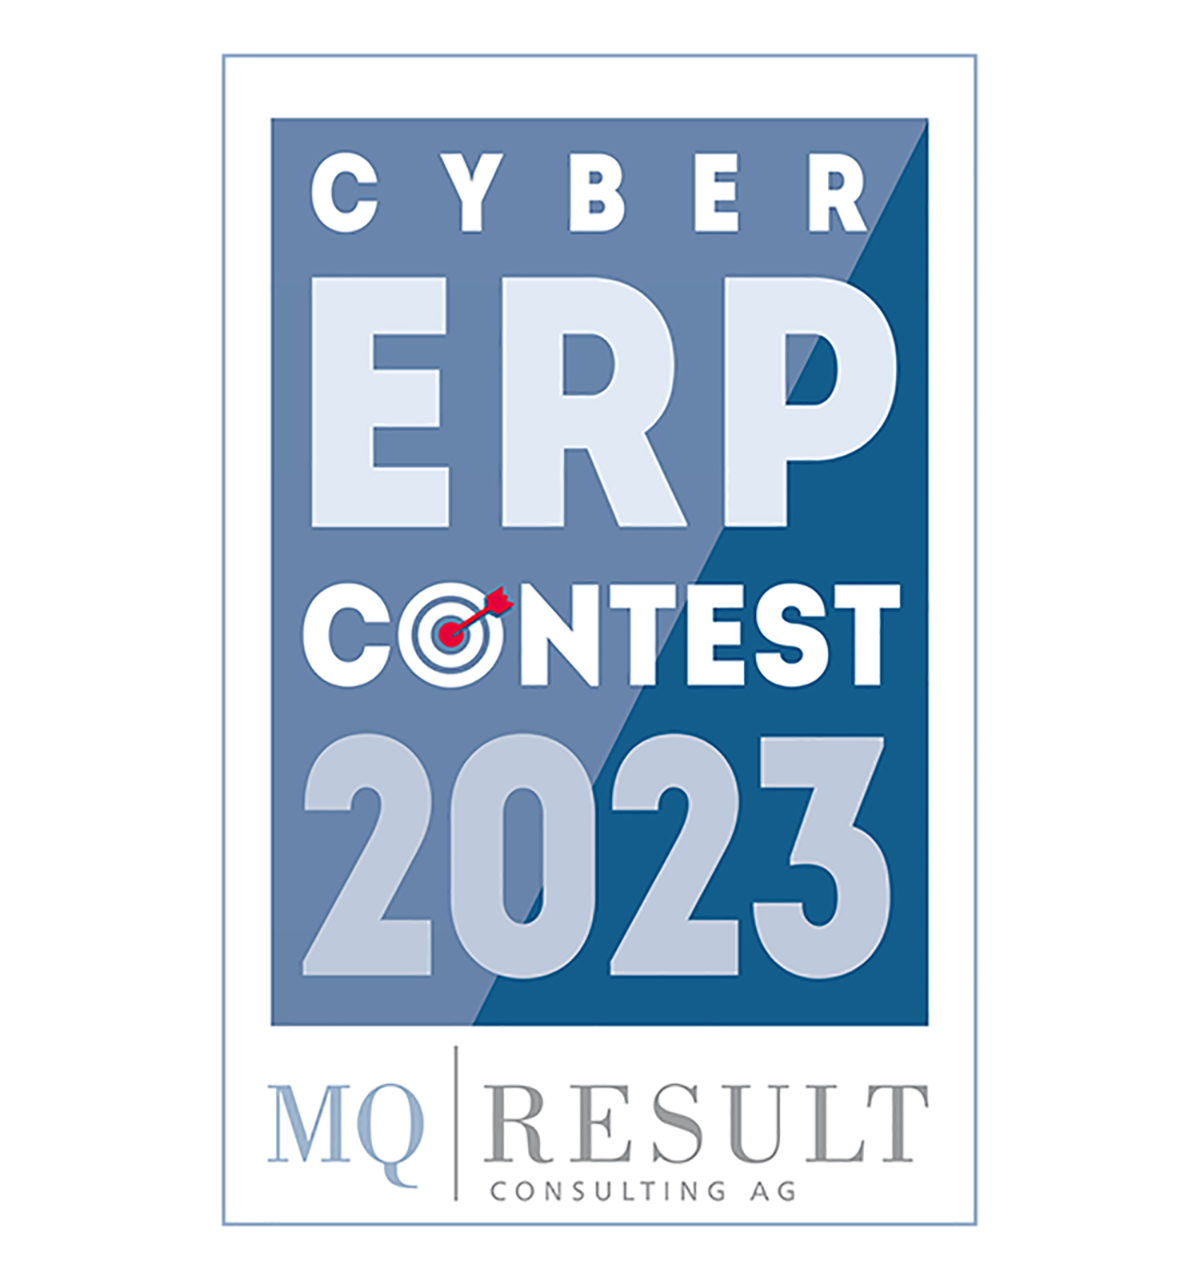 On Friday, 26.05.2023, the 1st Cyber ERP Contest 2023 will start at 10.00 a.m.